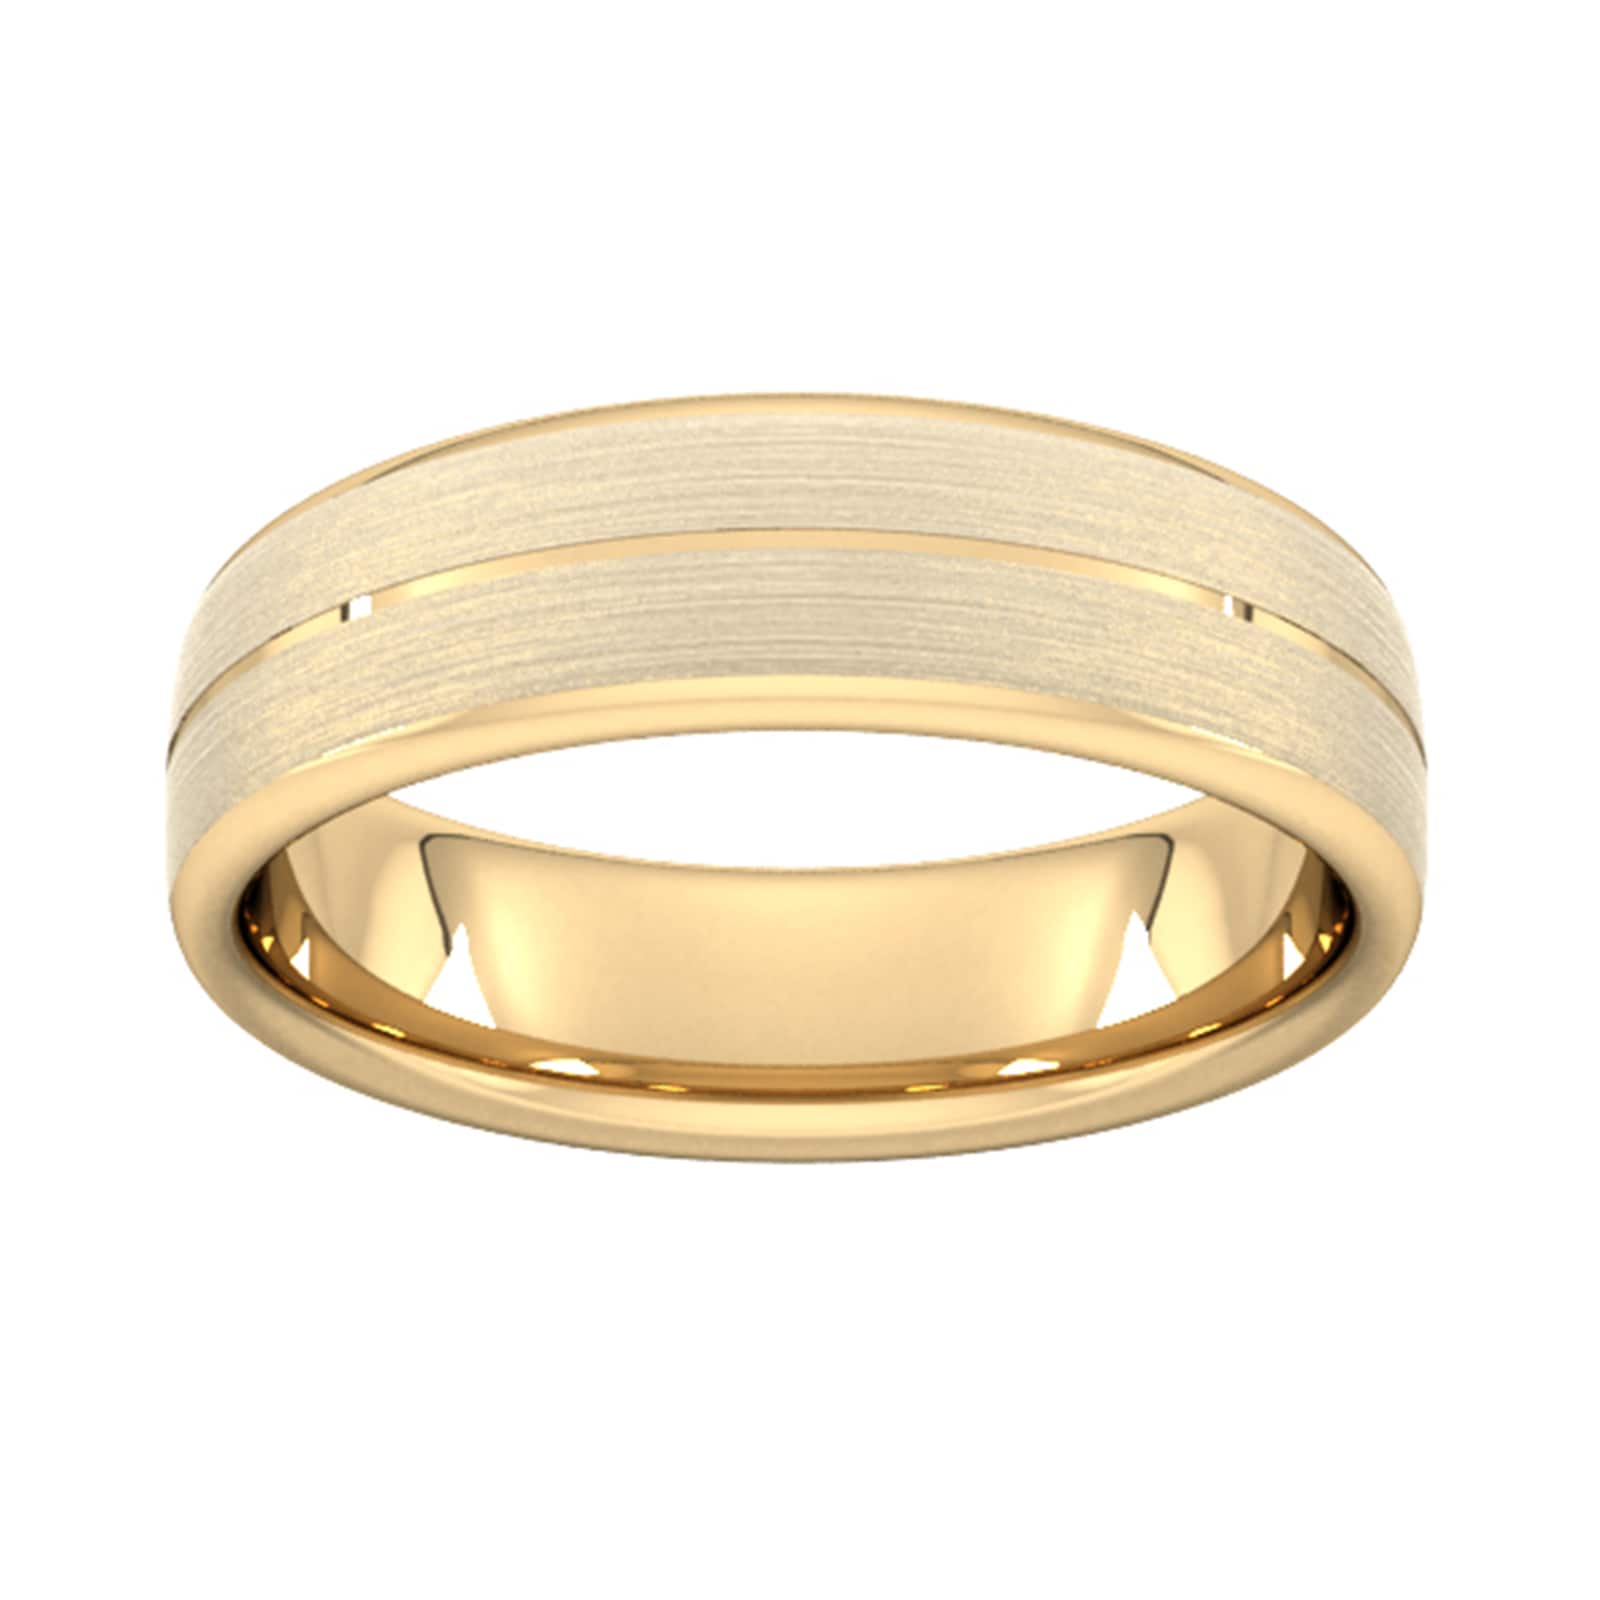 6mm Flat Court Heavy Centre Groove With Chamfered Edge Wedding Ring In 9 Carat Yellow Gold - Ring Size R